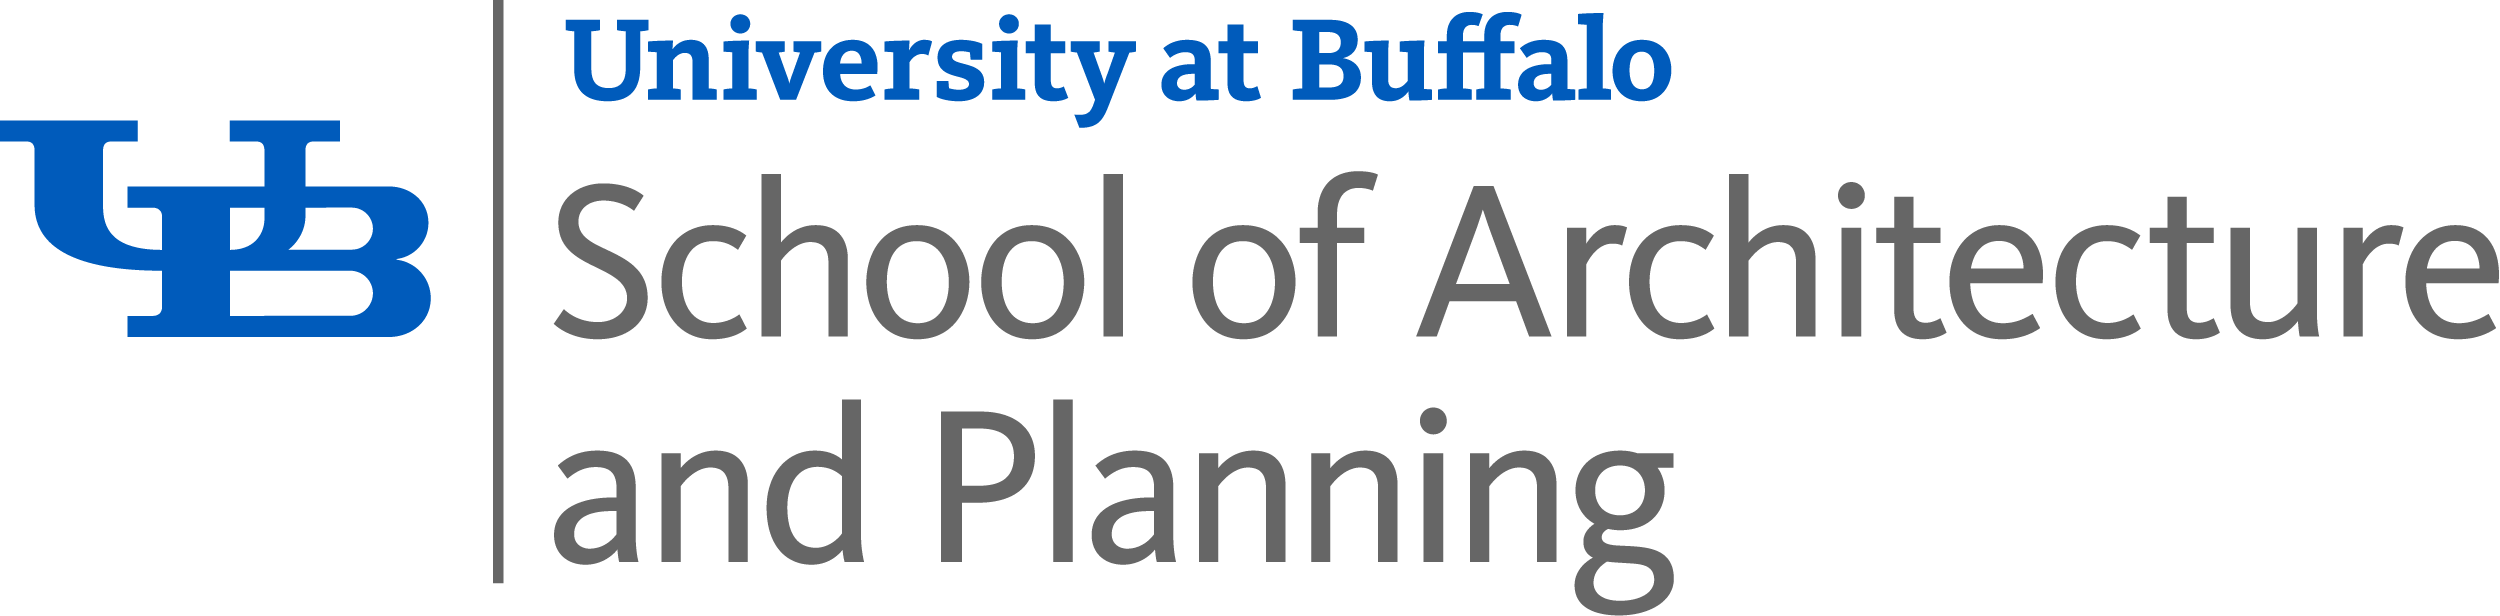 The School of Architecture and Planning, University at Buffalo